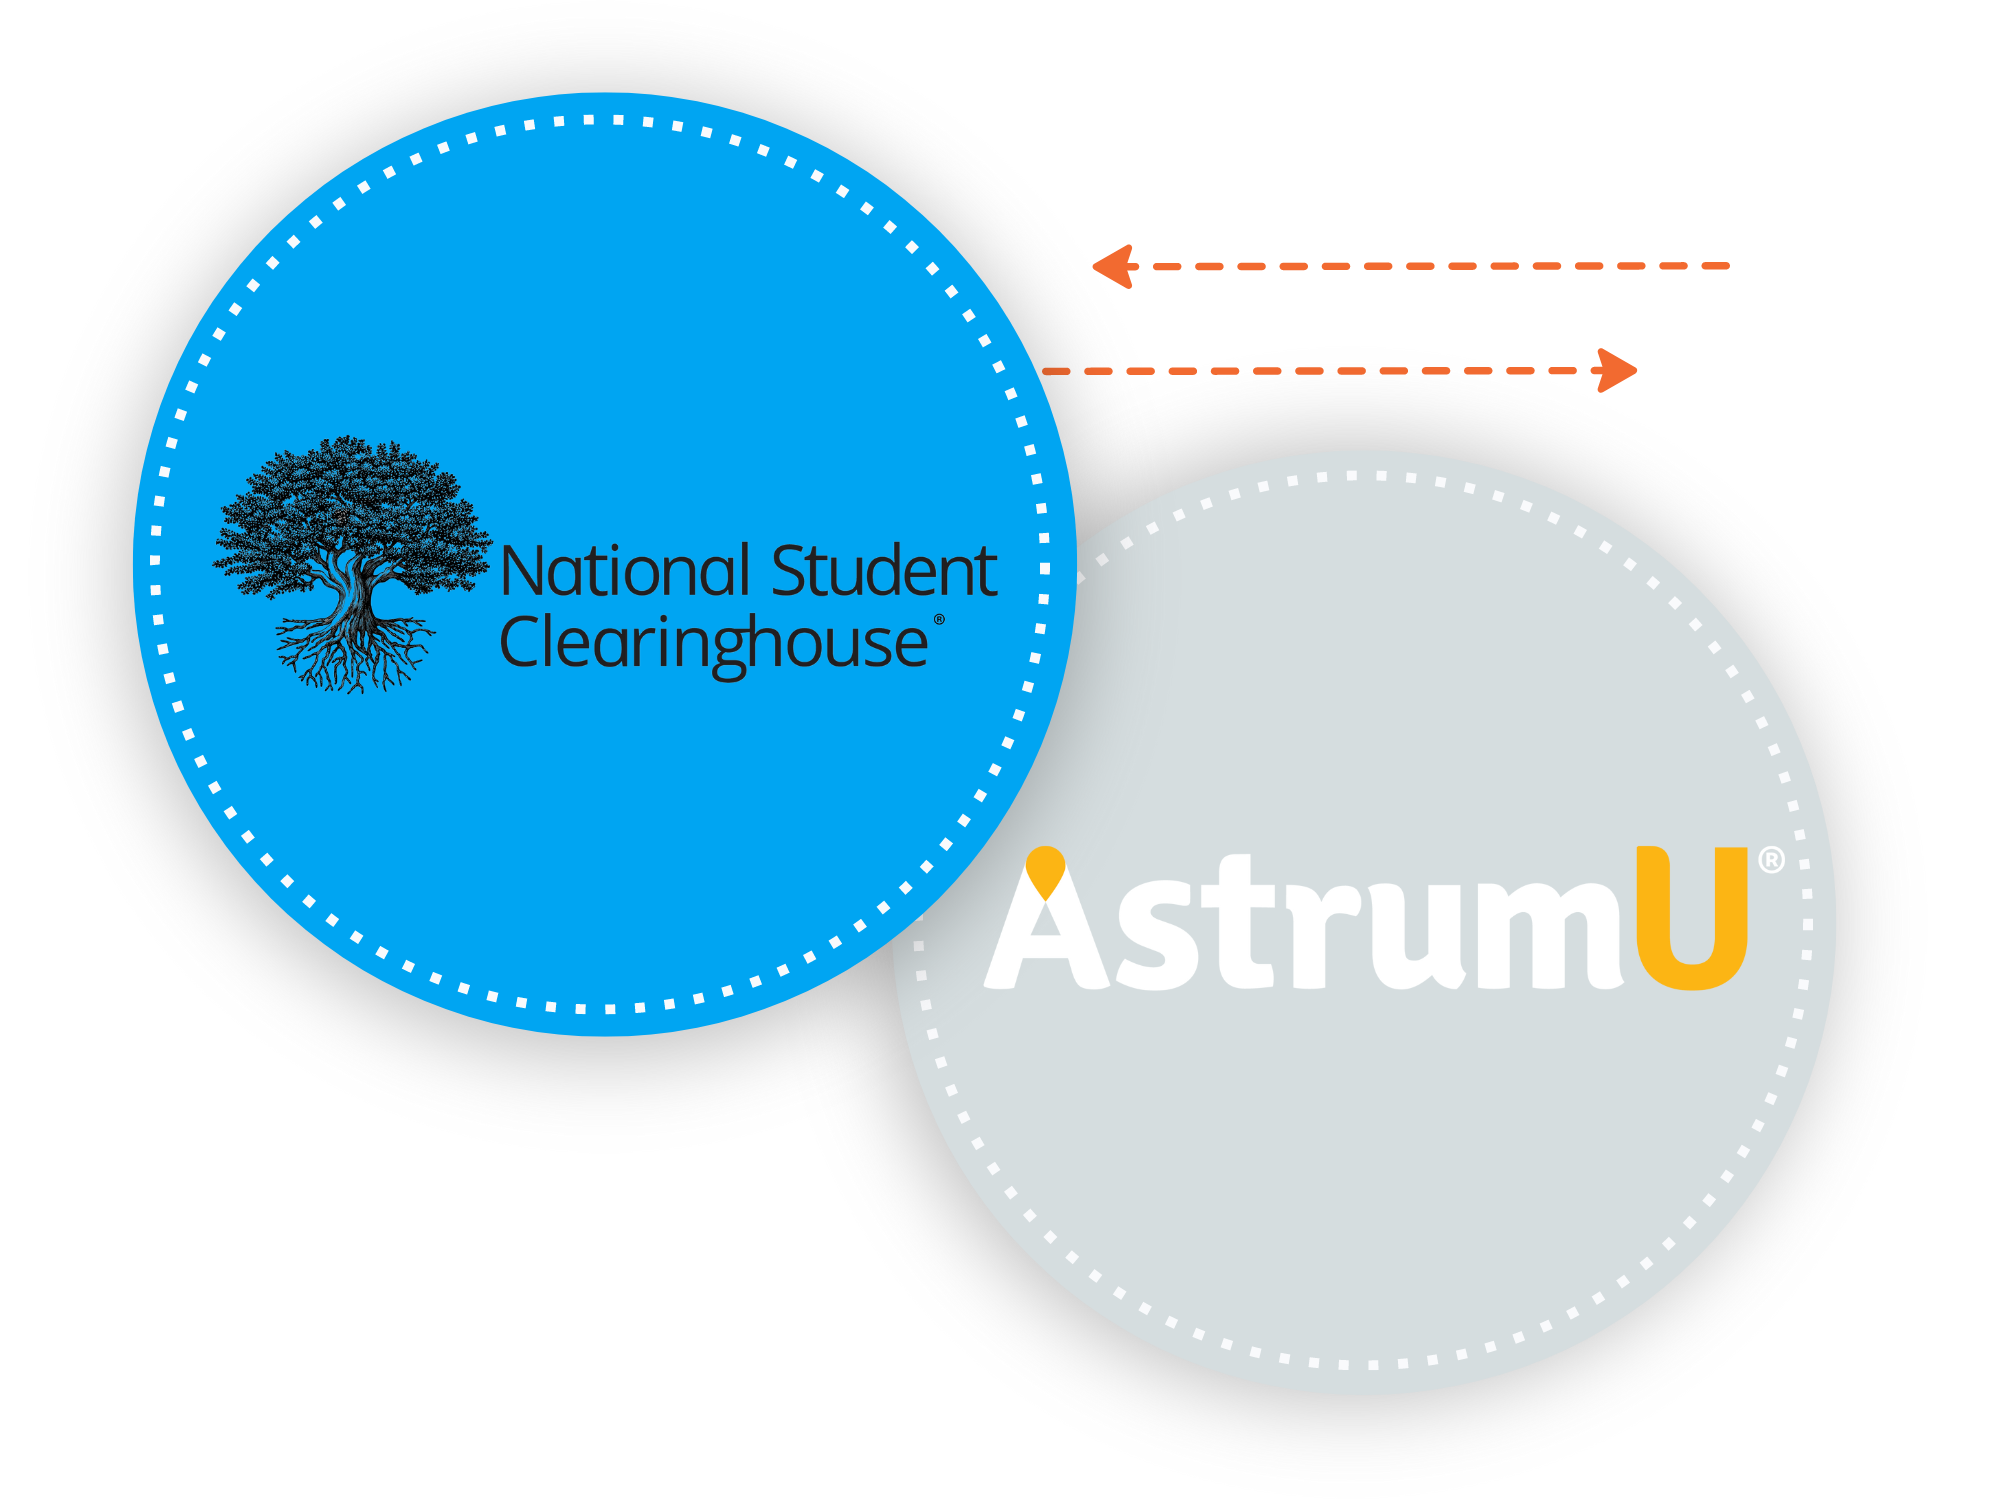 Logos for National Student Clearinghouse and AstrumU